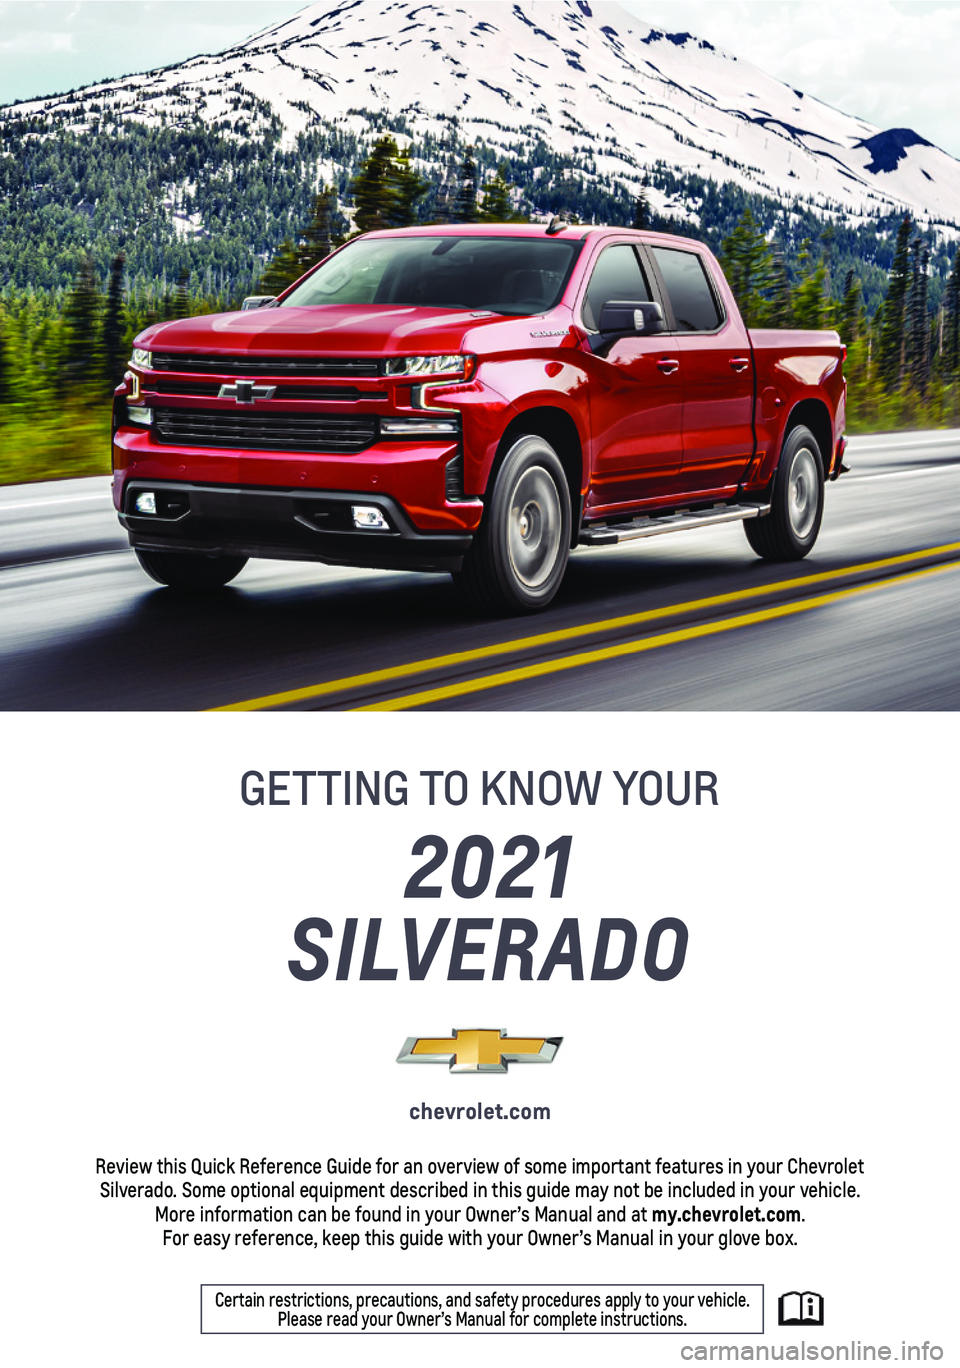 CHEVROLET SILVERADO 1500 2021  Get To Know Guide 1
Certain restrictions, precautions, and safety procedures apply to your v\
ehicle.  Please read your Owner’s Manual for complete instructions.
2021 
SILVERADO
chevrolet.com
Review this Quick Refere